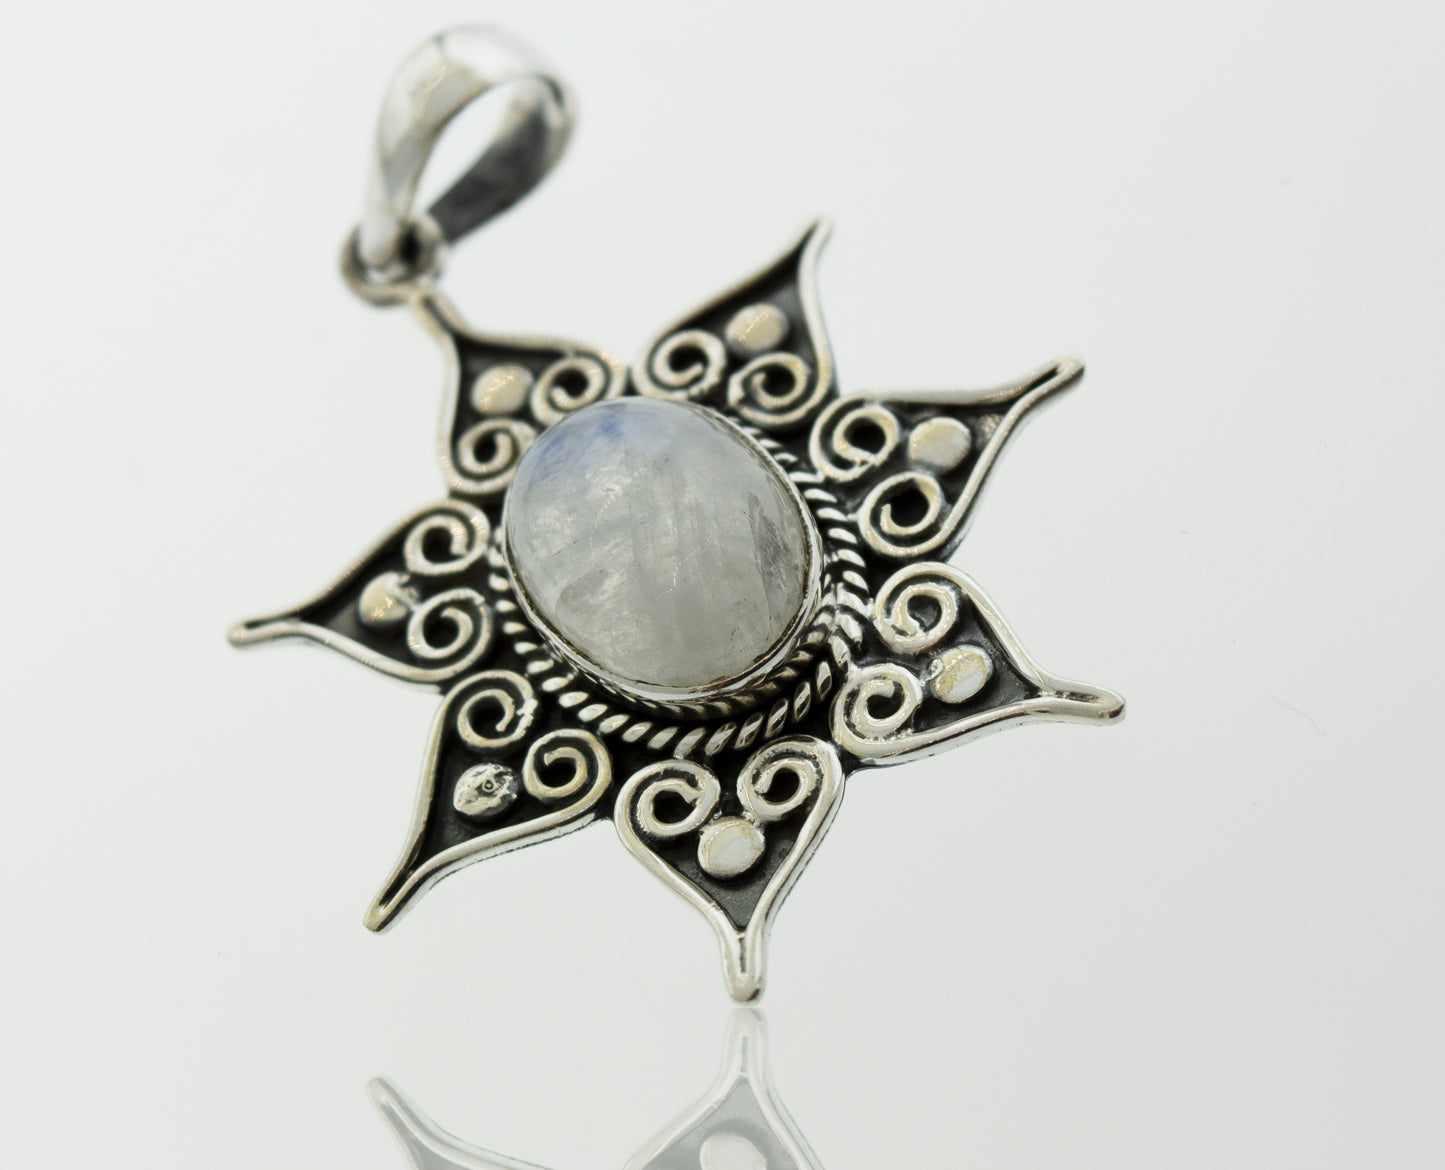 A Super Silver moonstone pendant with a flower star setting, adorned with delicate spirals.